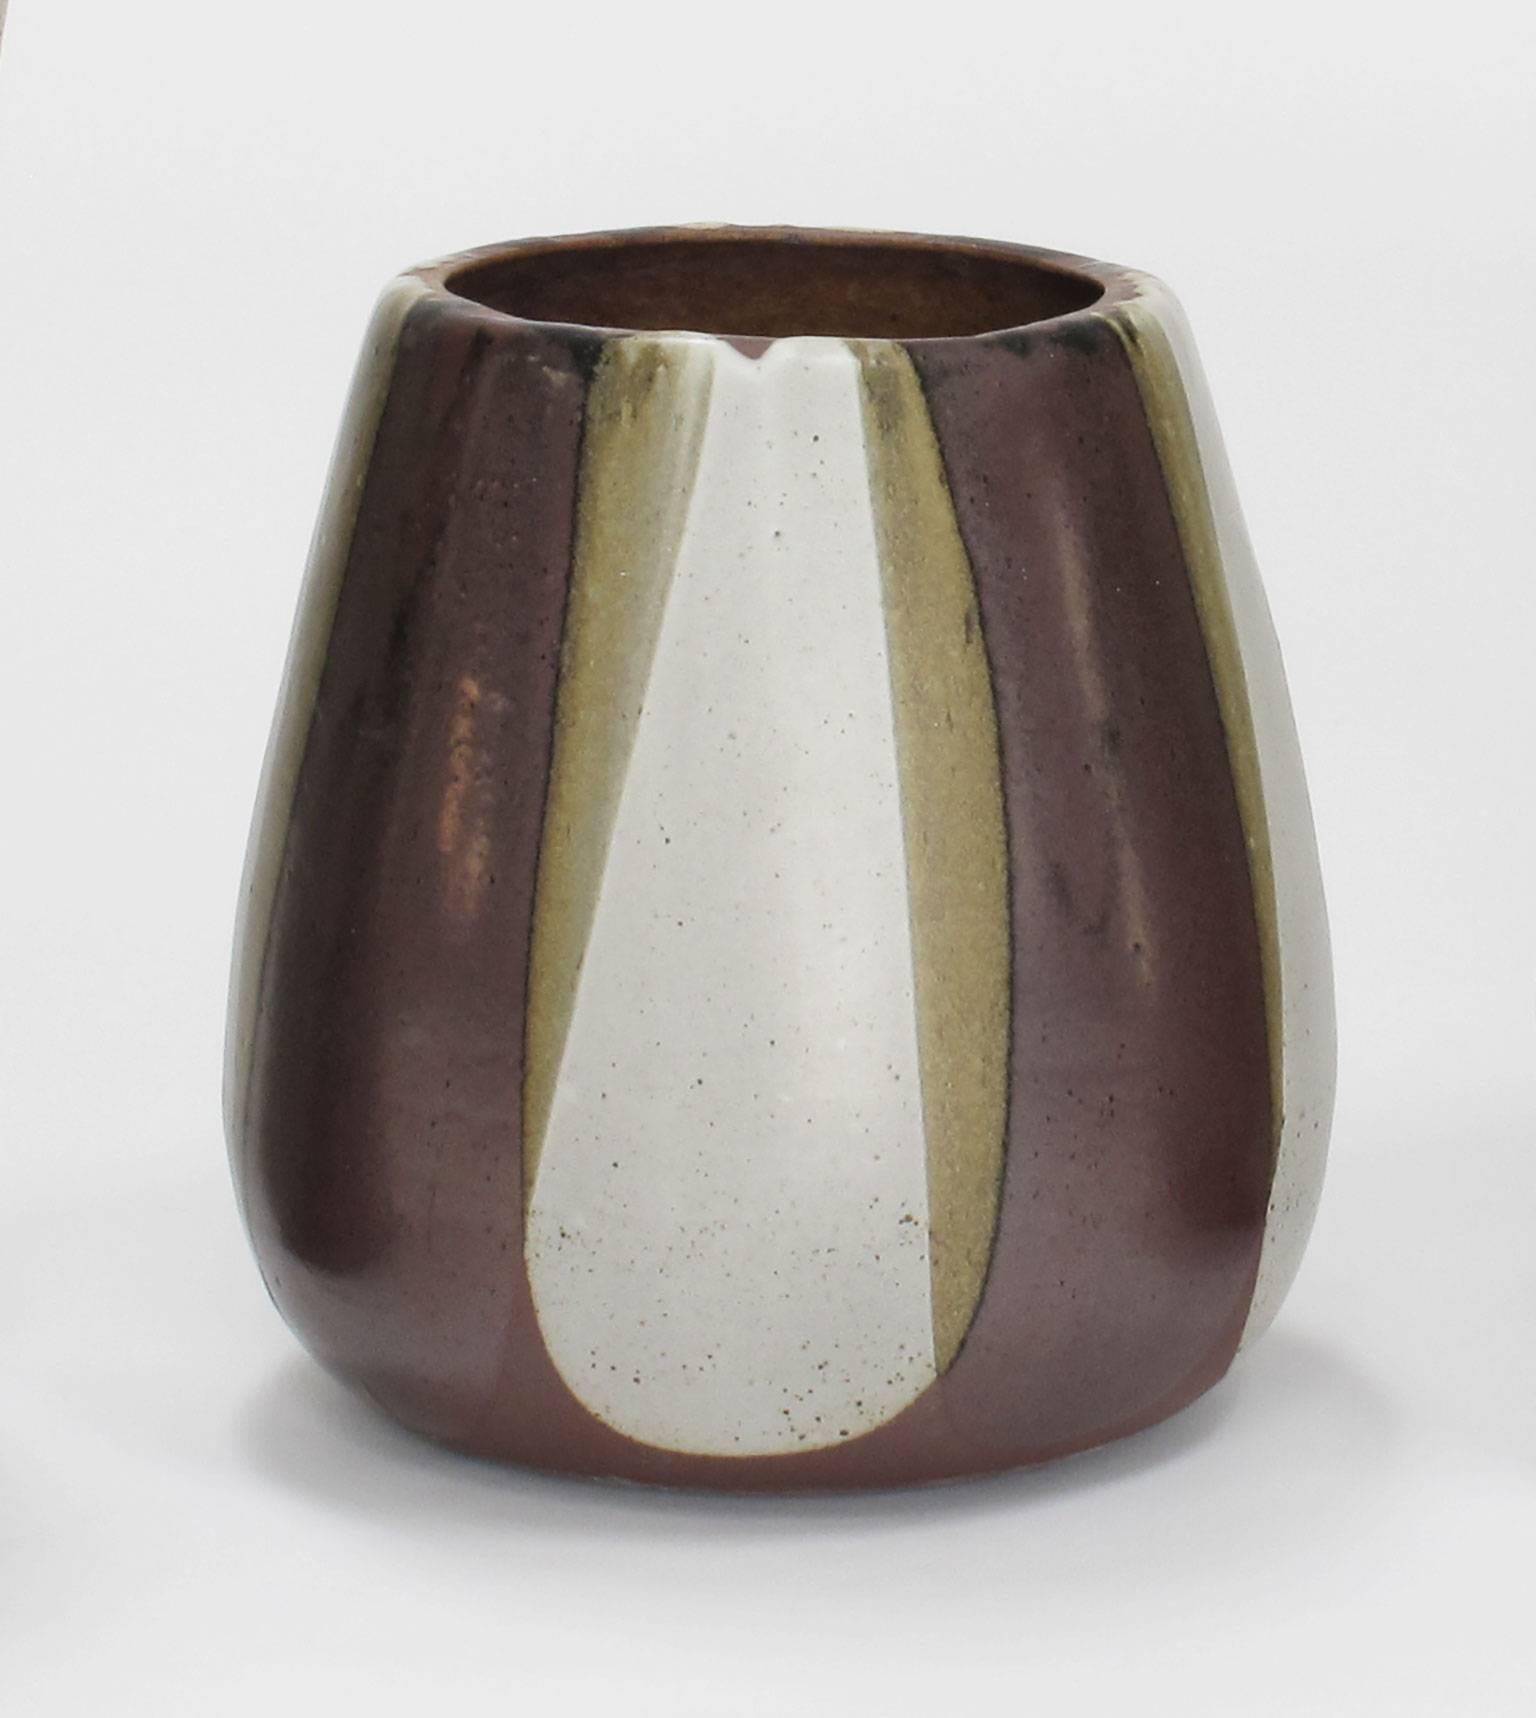 David Cressey 'Flame' glaze design, stoneware, glazed, 1960s, Pro Artisan collection, architectural pottery, Los Angeles, California, measures: 13.5 high x 12 diameter inches.